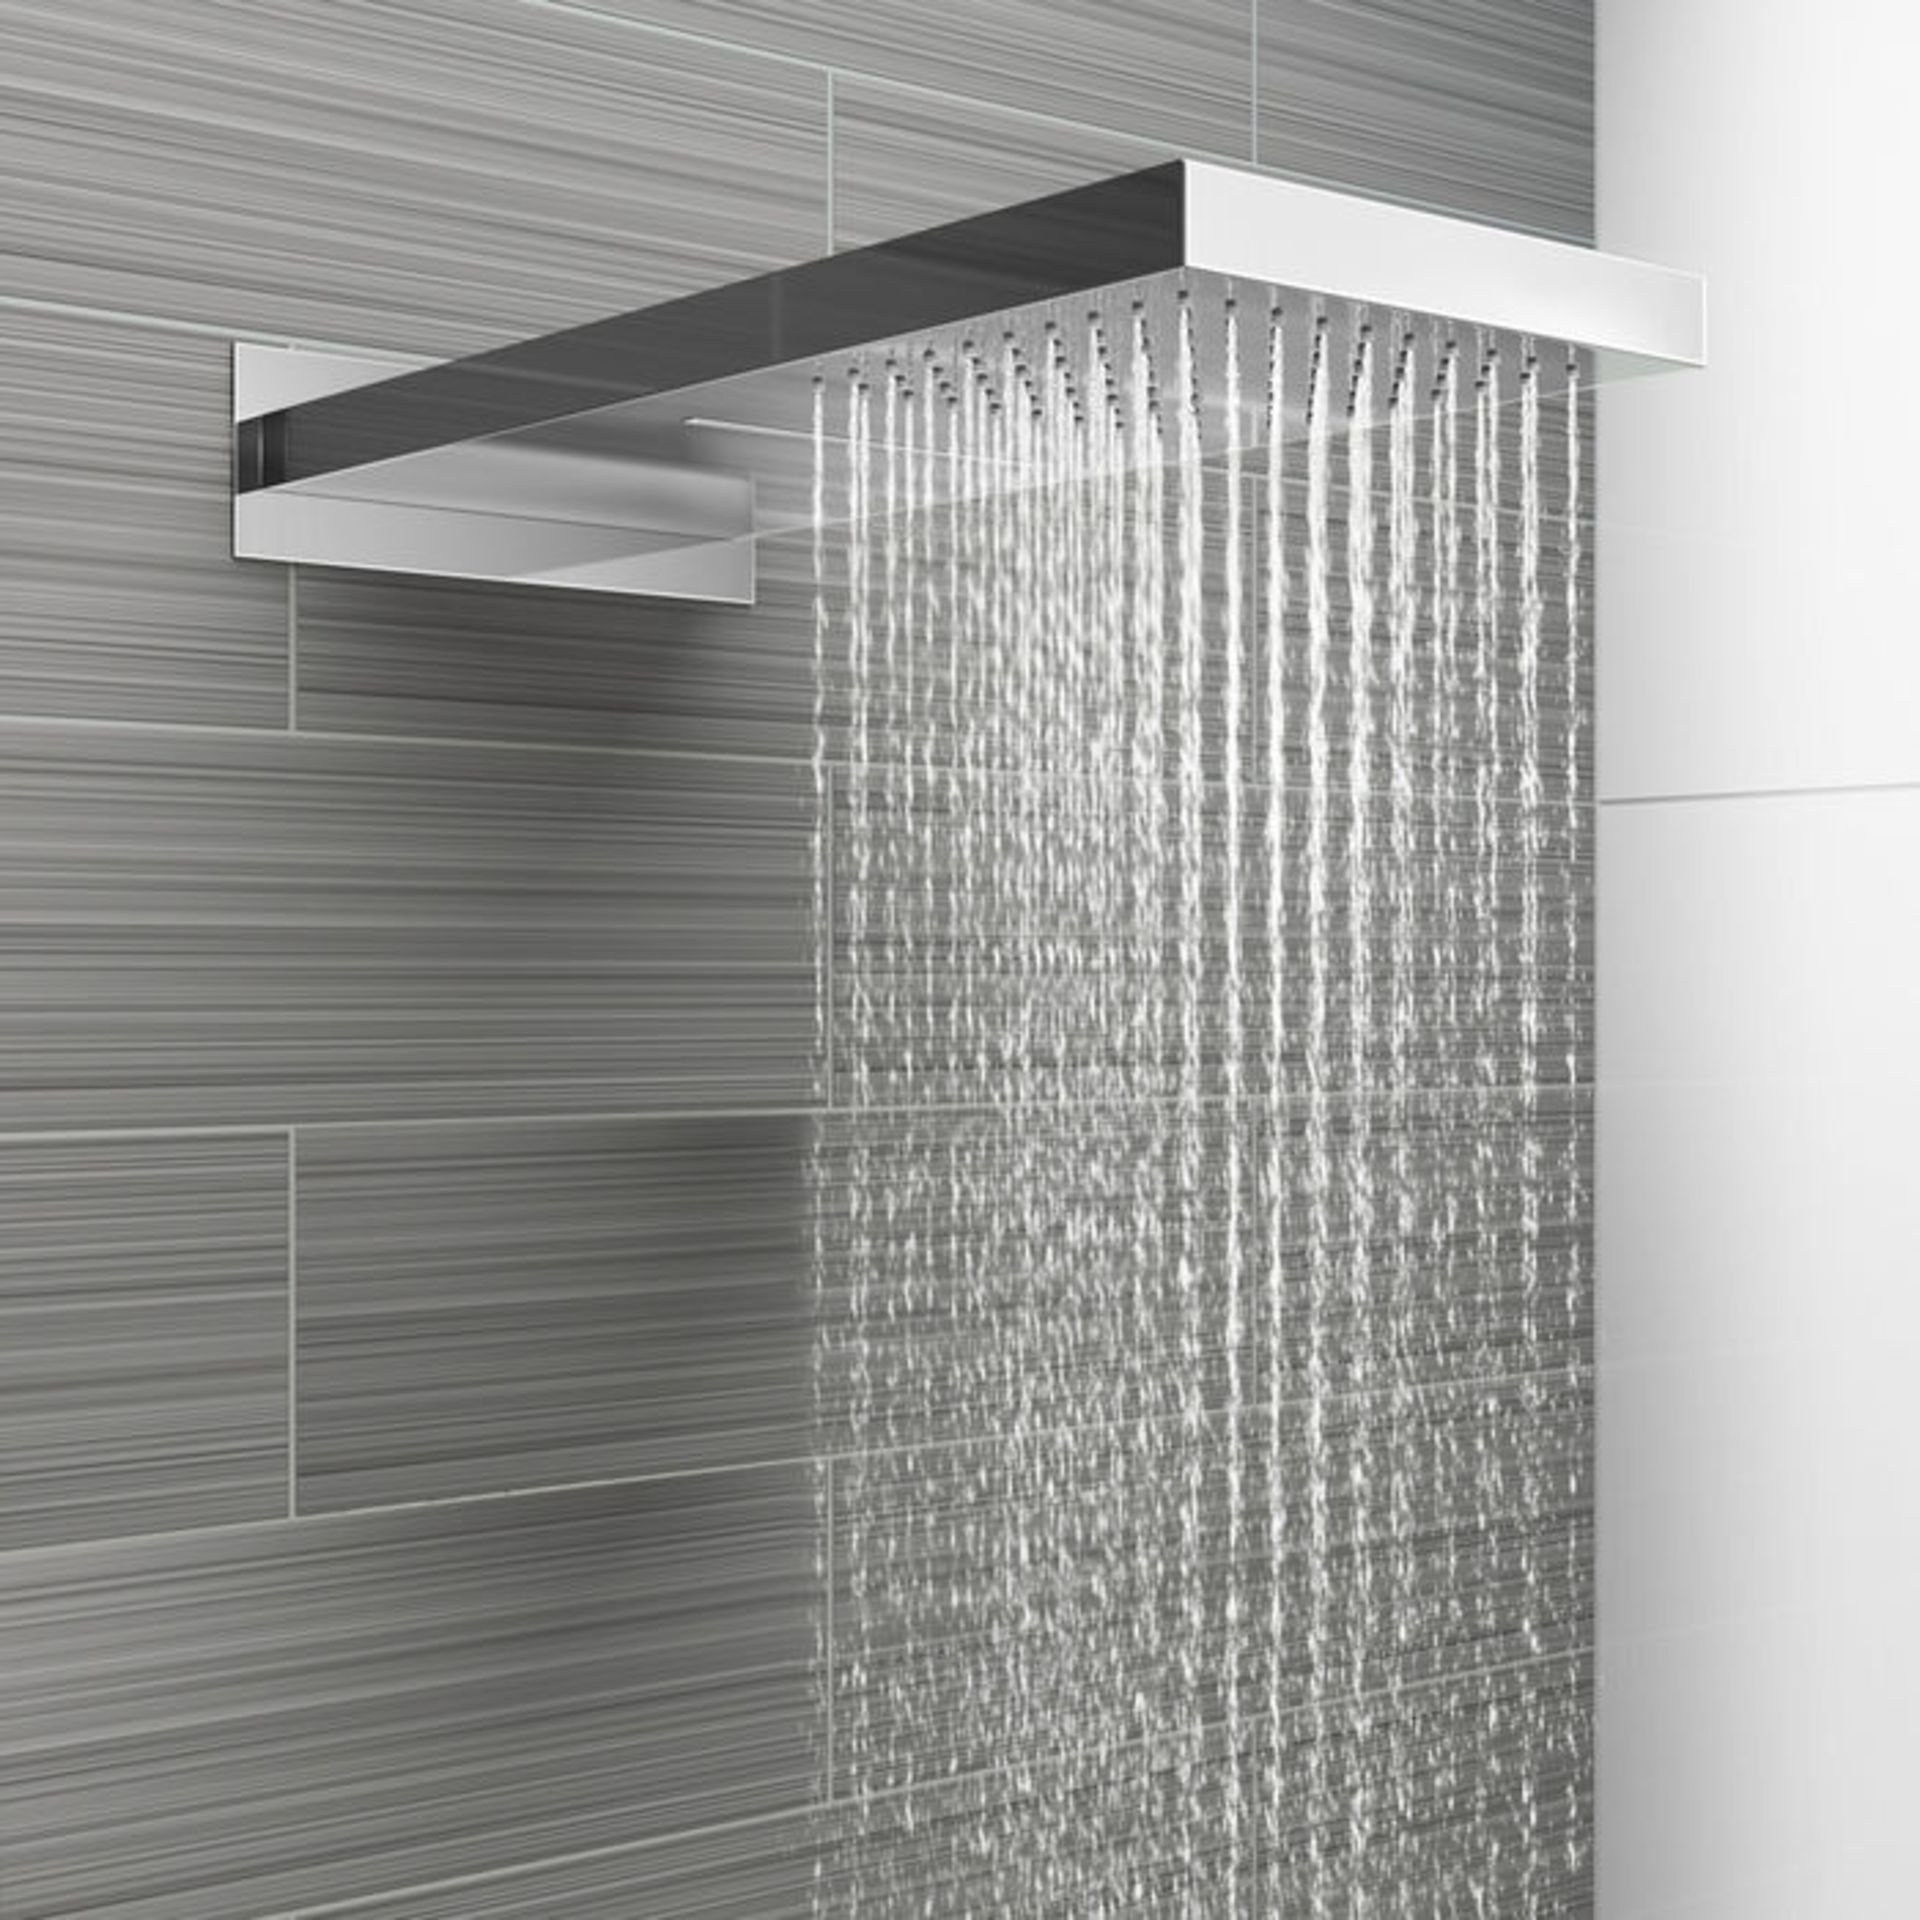 (L27) Stainless Steel 230x500mm Waterfall Shower Head RRP £374.99 Dual function waterfall and - Image 3 of 3